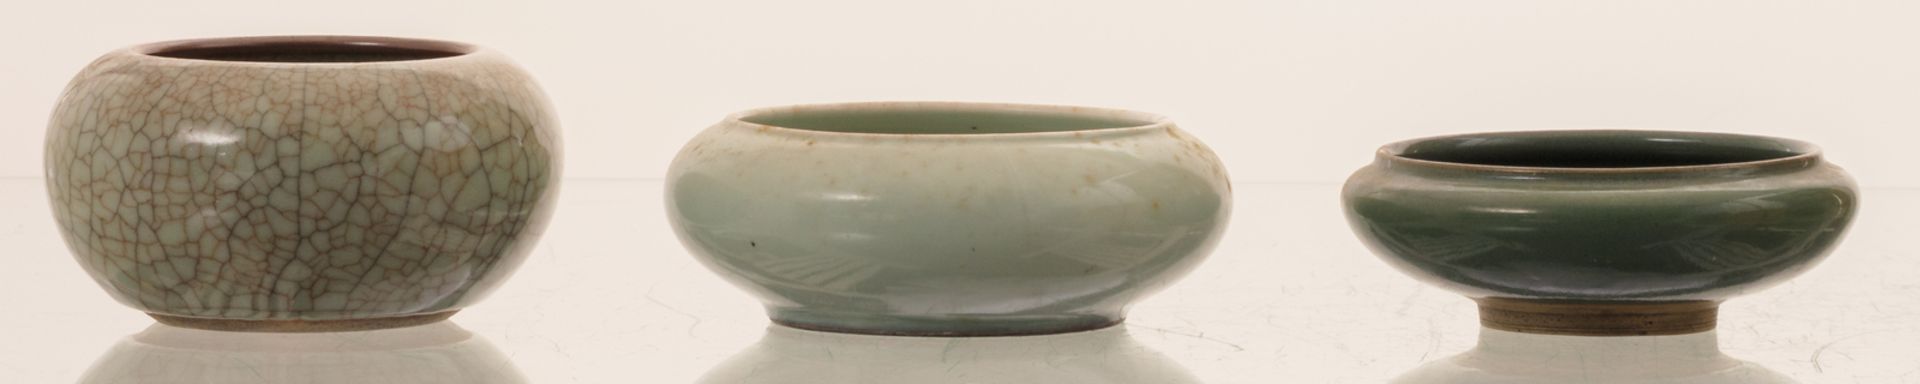 A various of Chinese celadon and crackleware porcelain and stoneware vases, plates and cups, two - Image 5 of 30